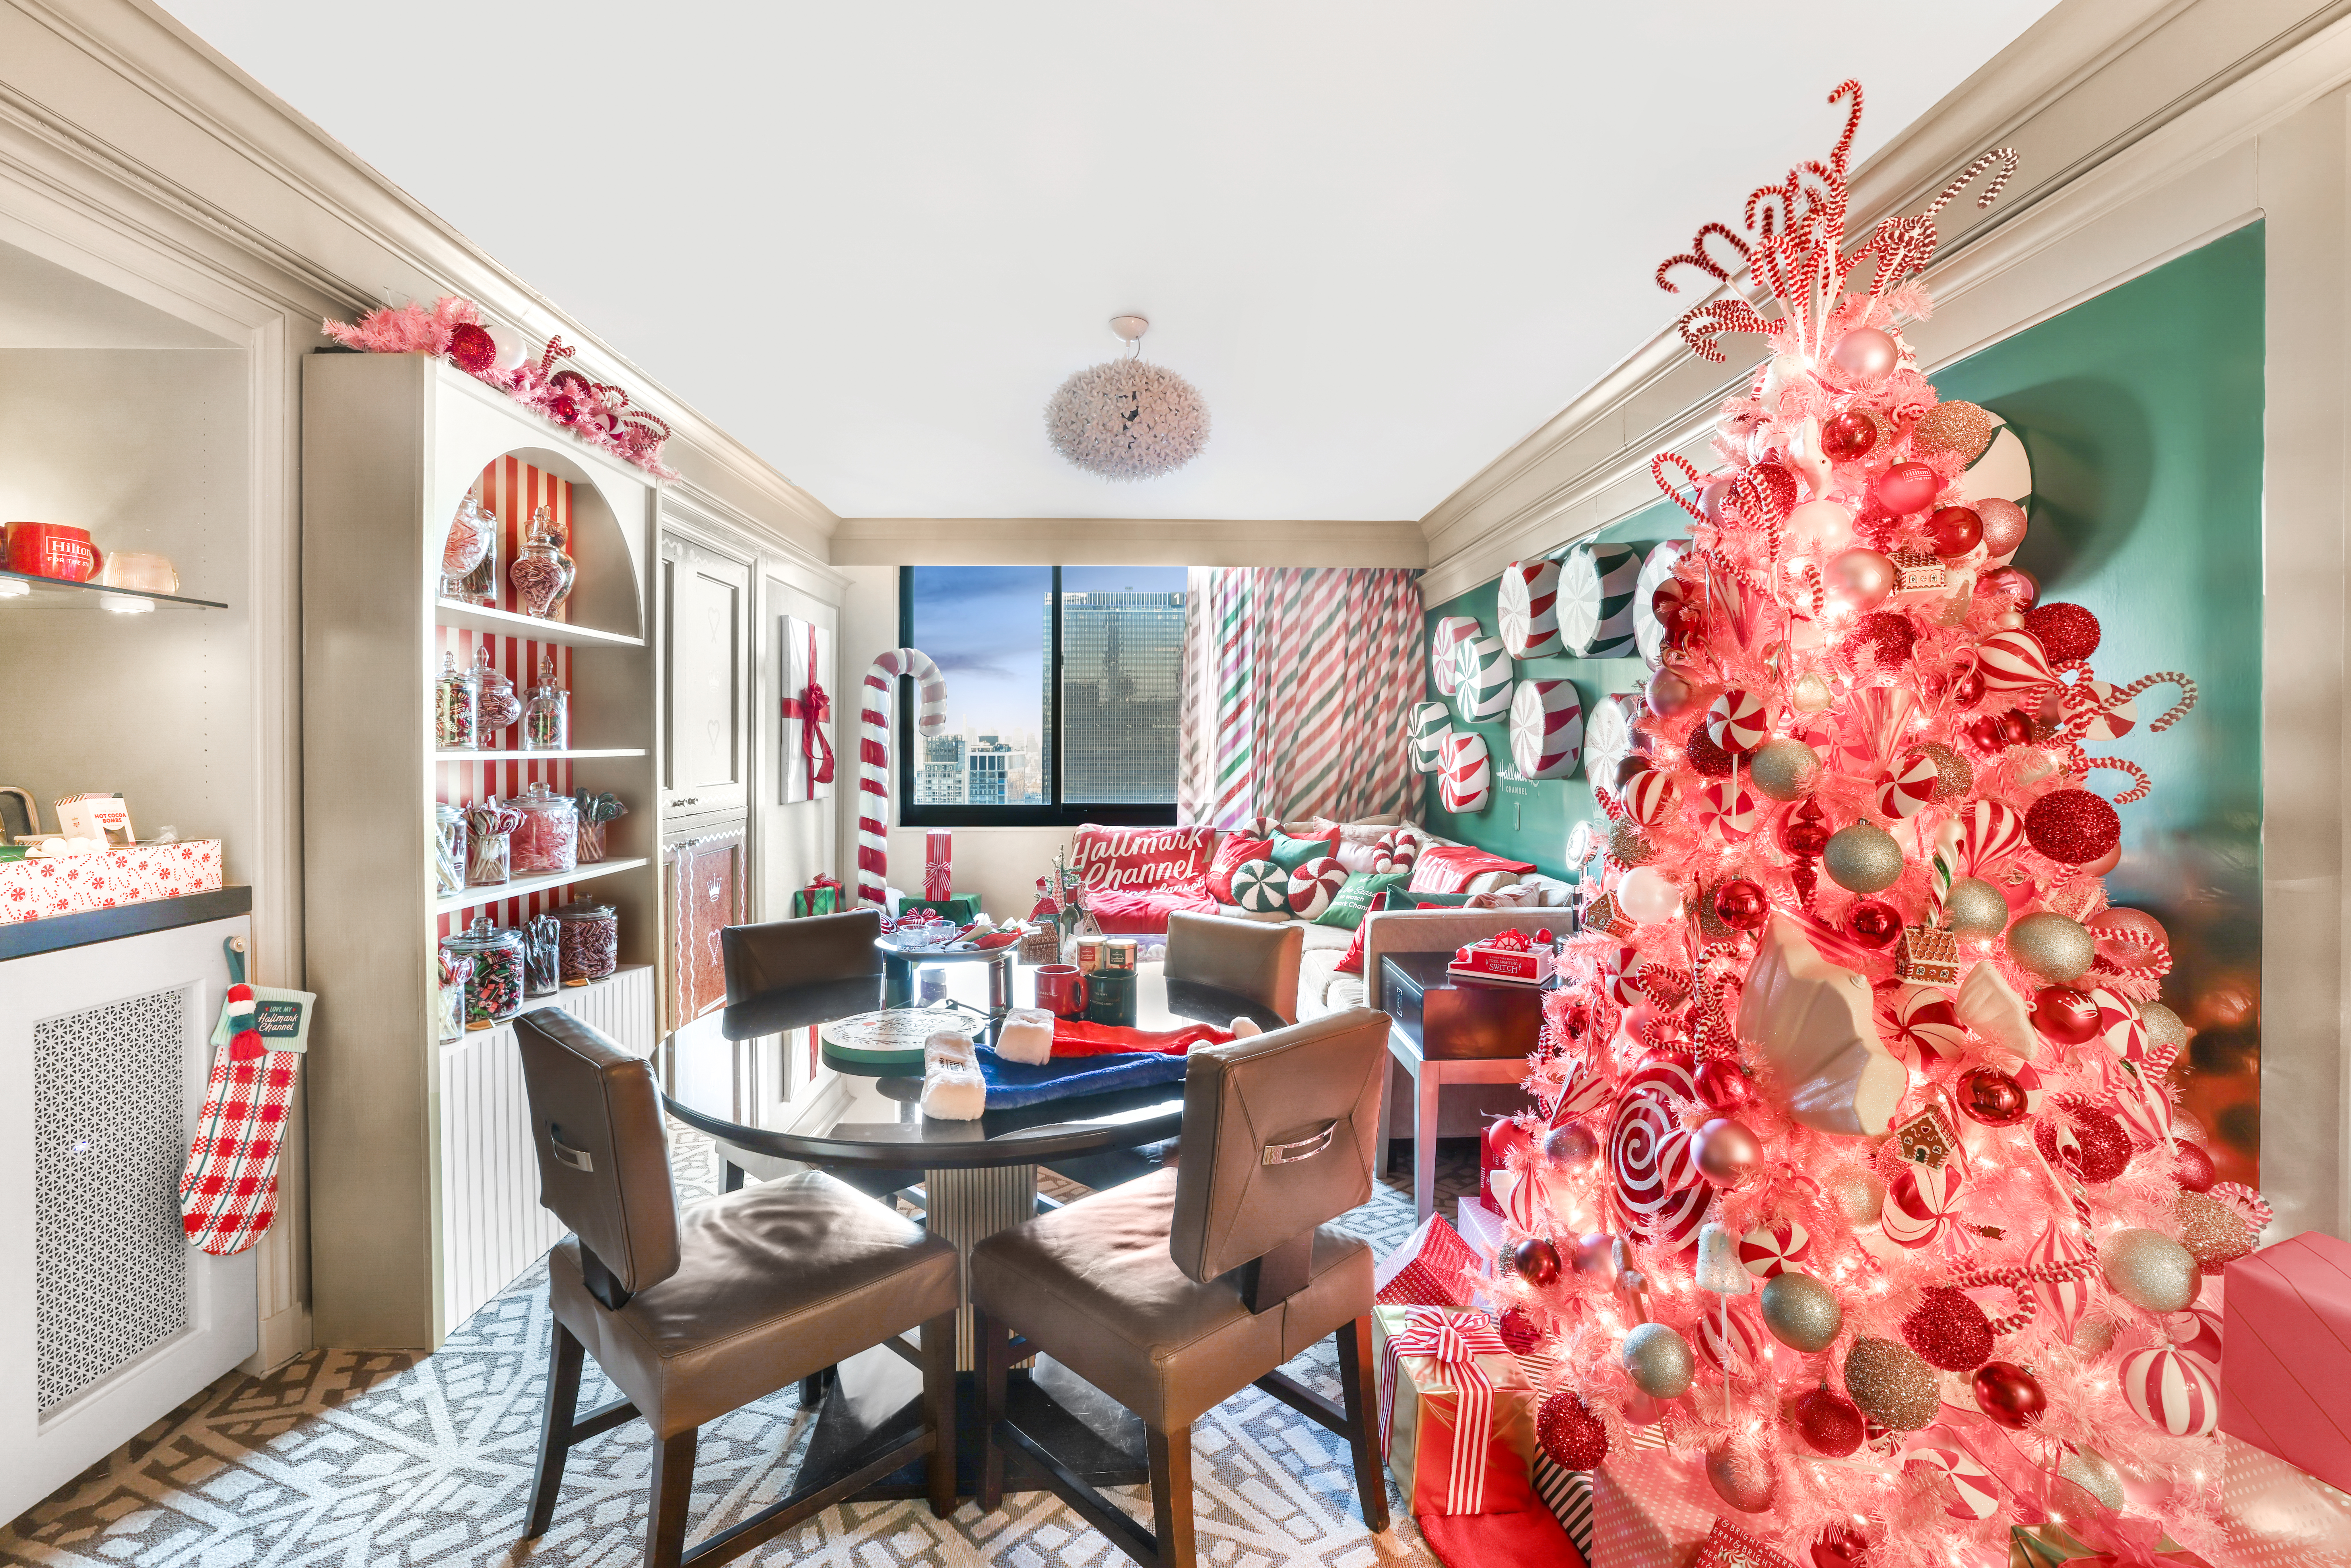 Hilton and Hallmark Channel - Hallmark’s Holiday Sweetest Suite at Hilton New York Times Square - Decor, Table and Seating